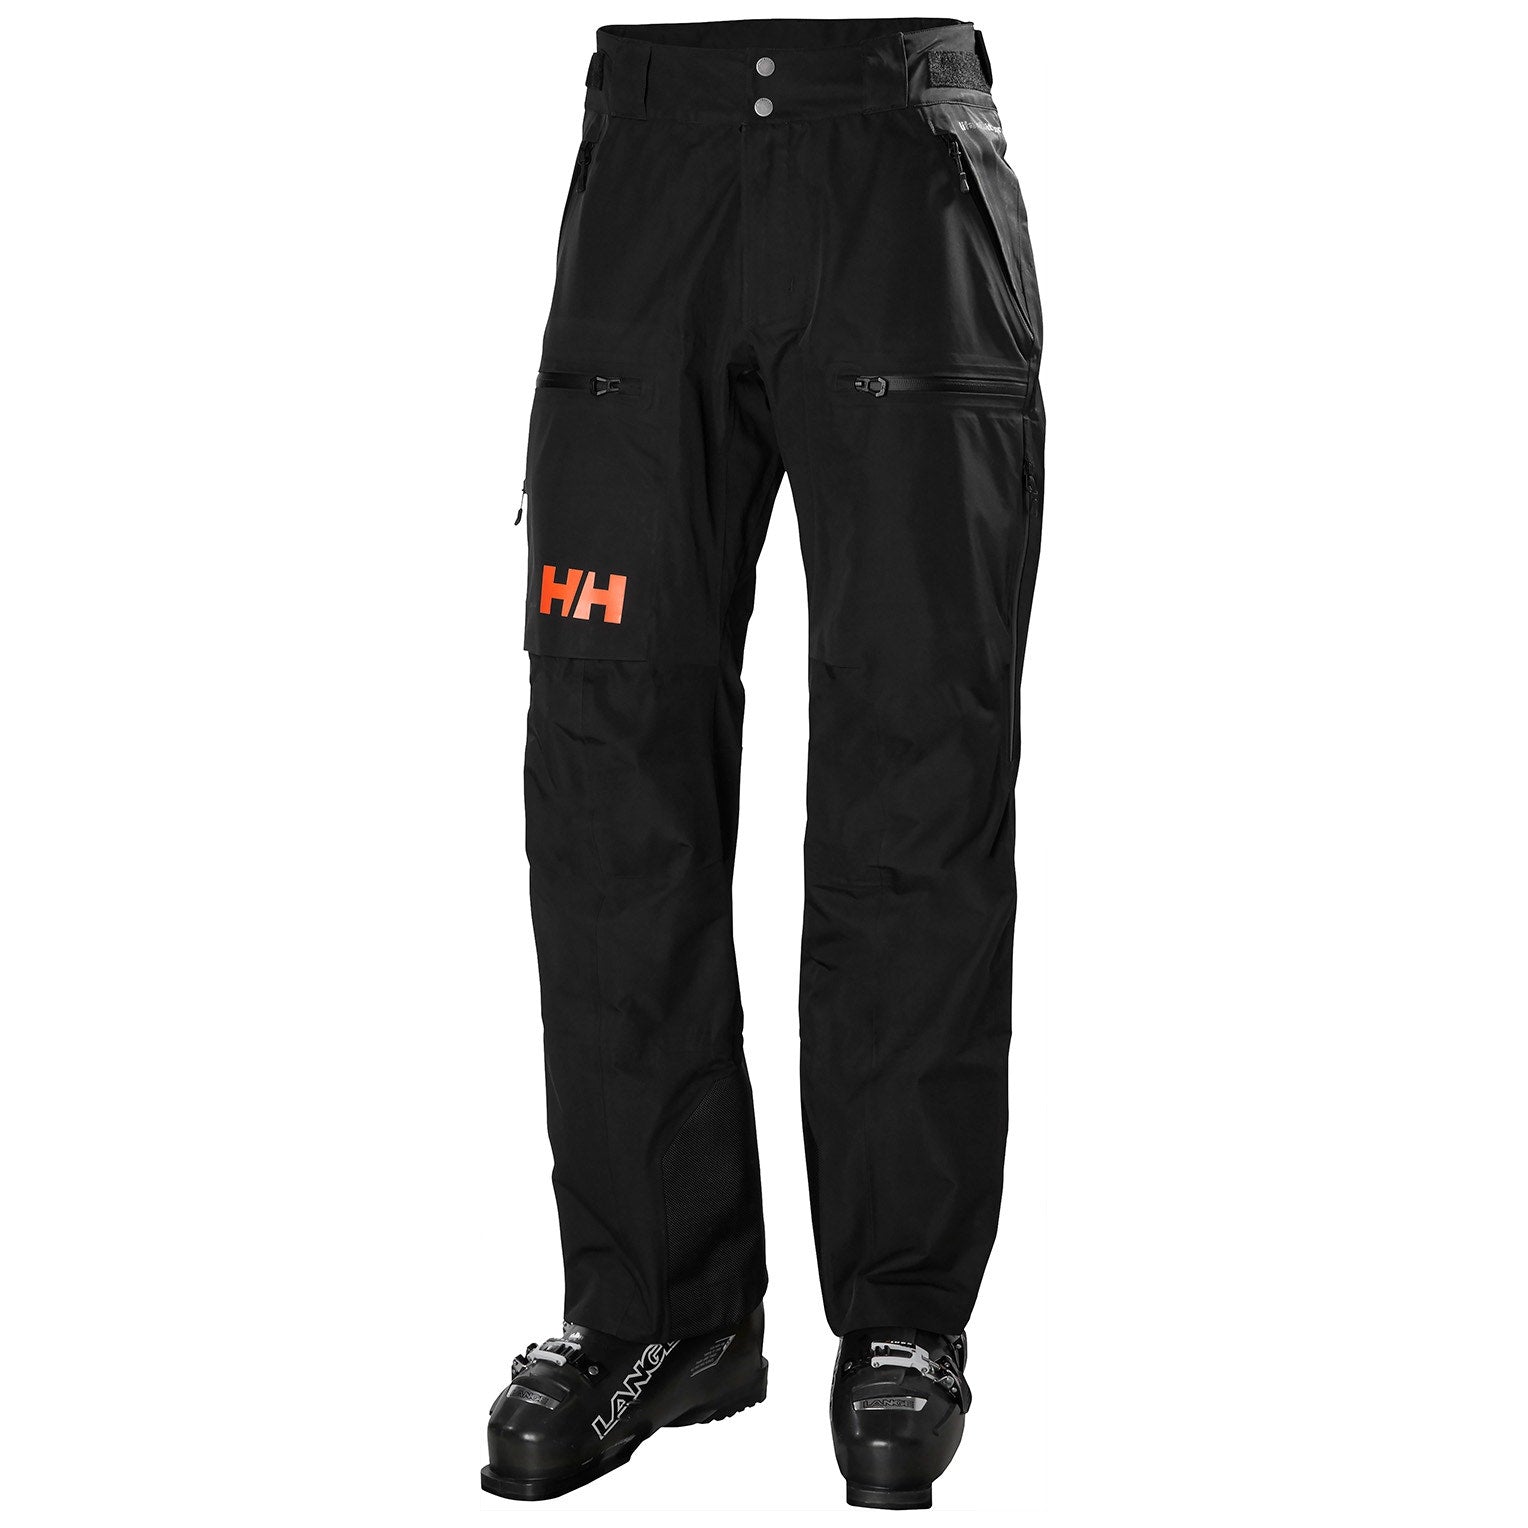 ELEVATION INFINITY SHELL 2.0 PANT